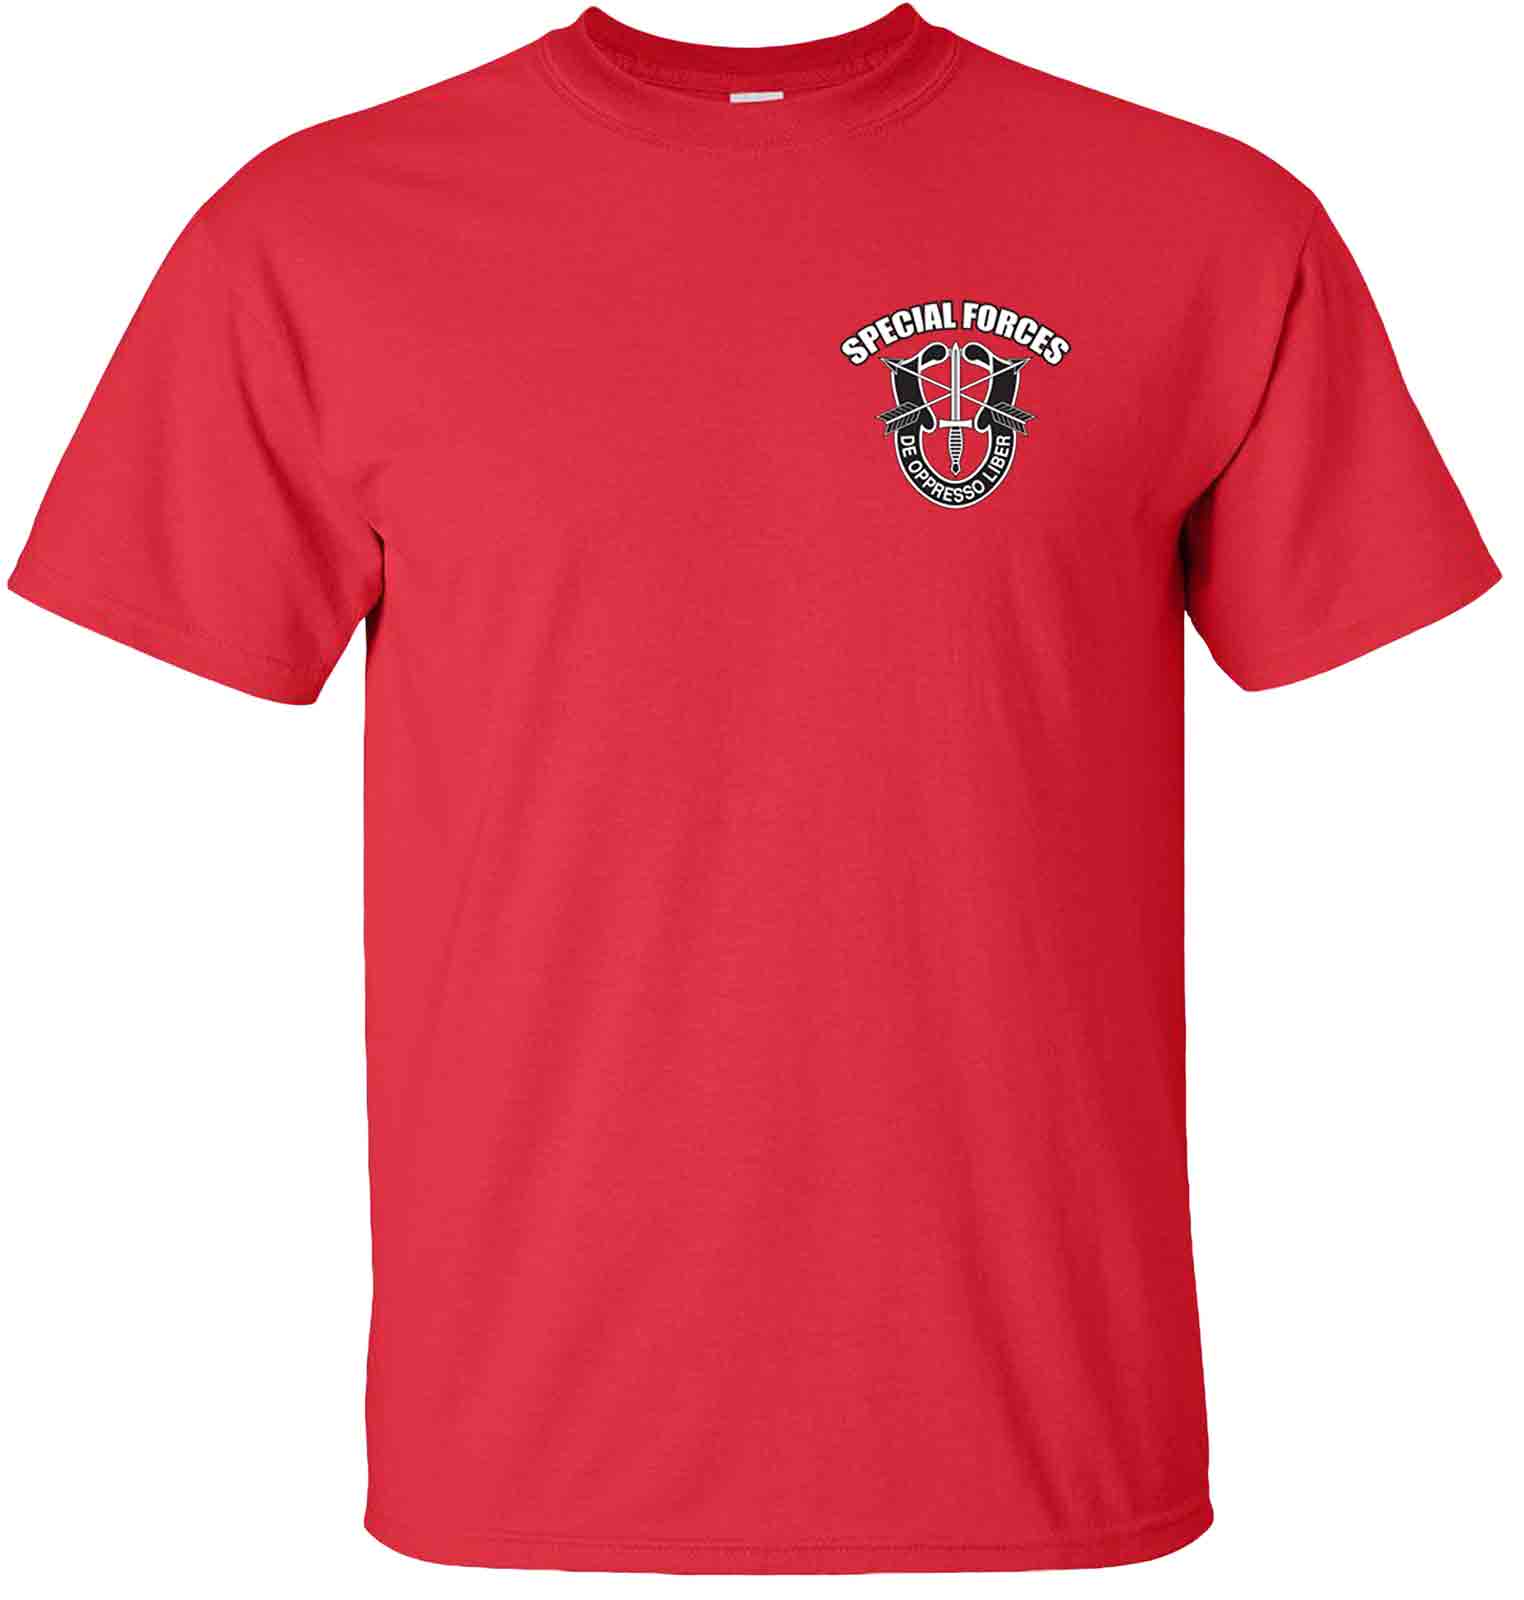 army-special-forces-t-shirt-de-oppresso-liber--red.jpg